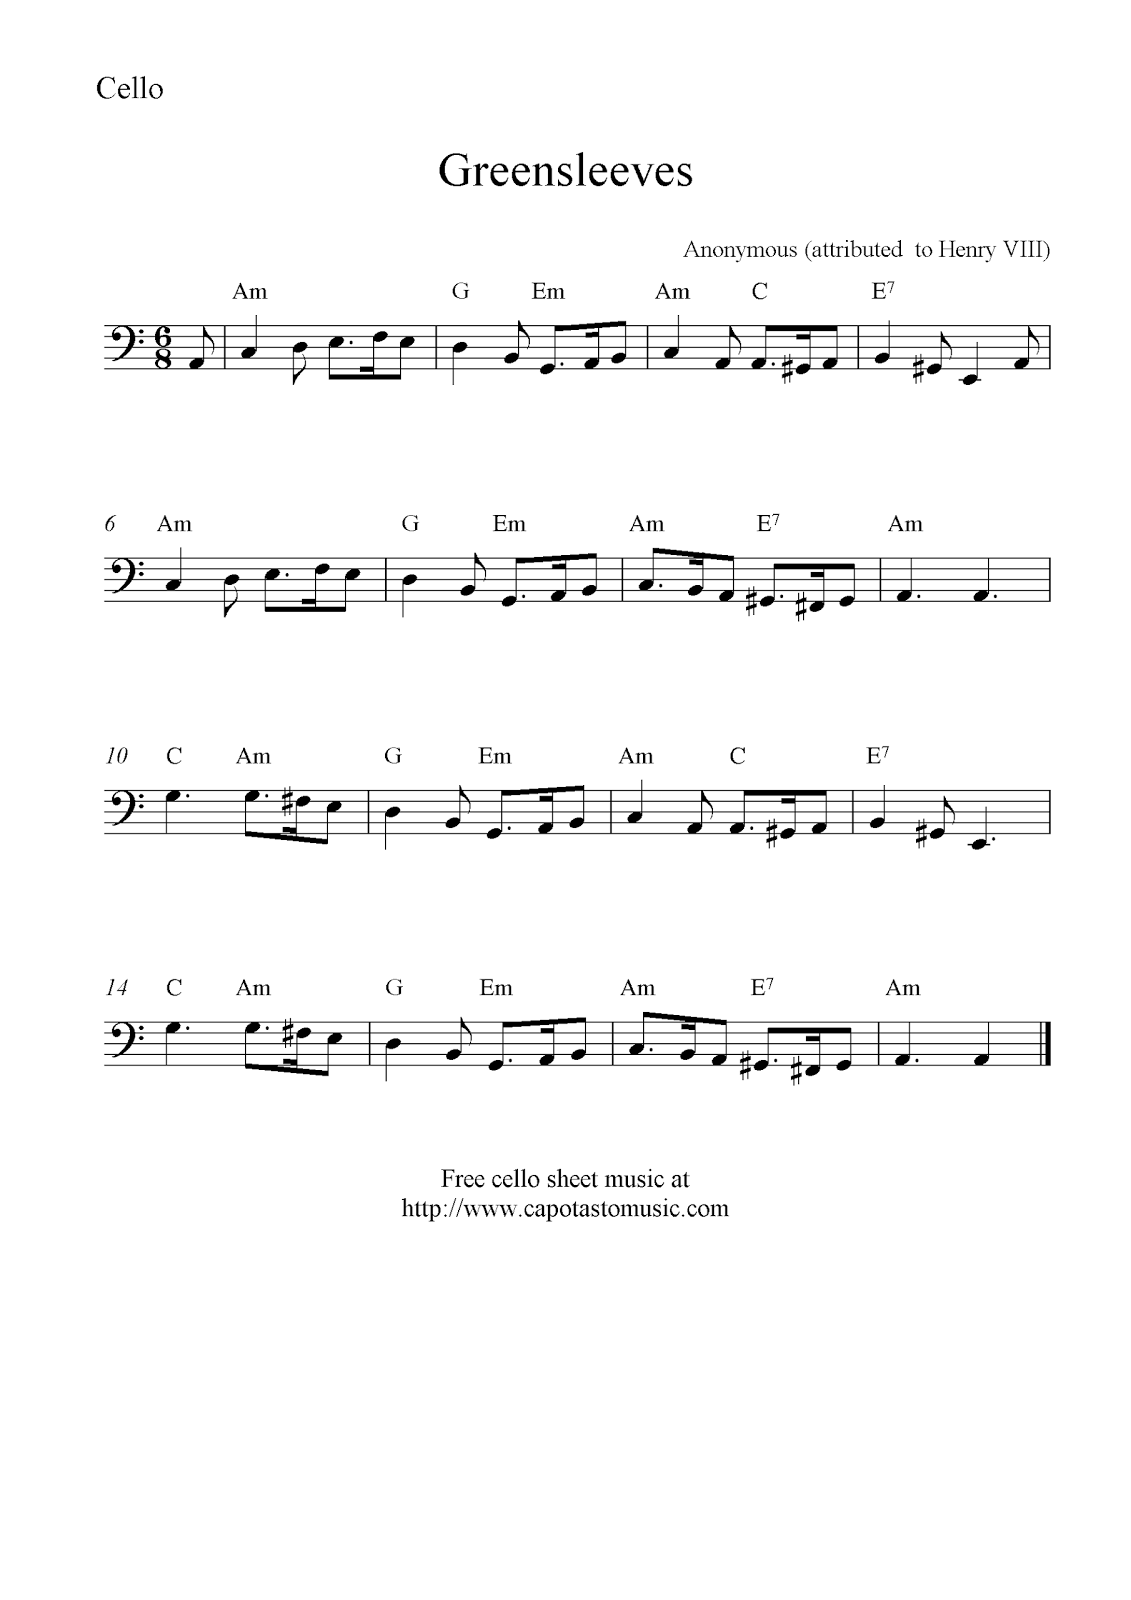 greensleeves-free-cello-sheet-music-notes